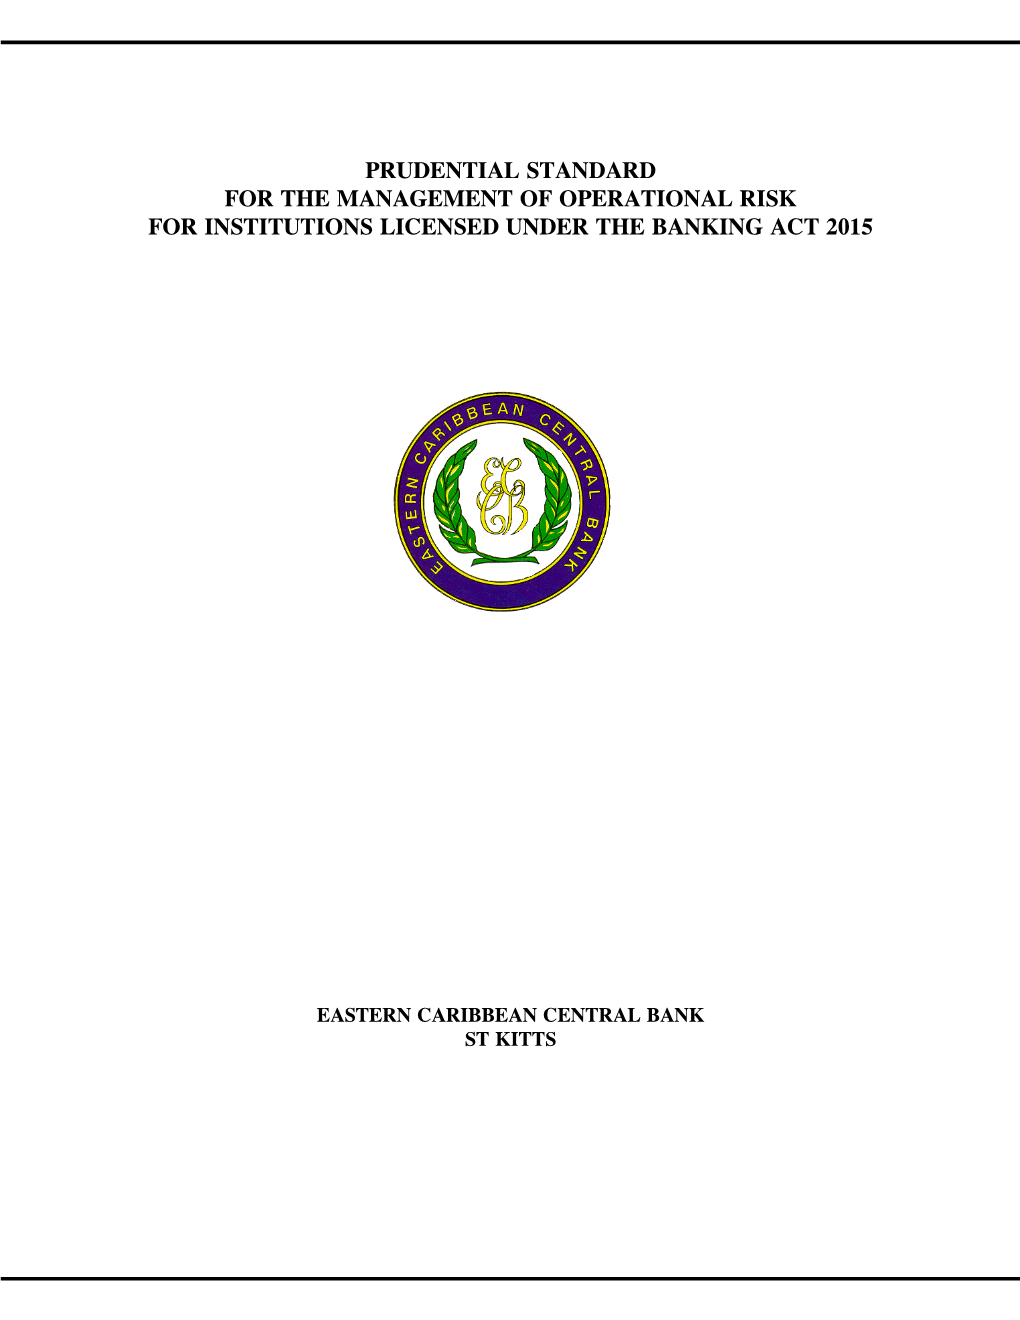 Prudential Standard for the Management of Operational Risk for Institutions Licensed Under the Banking Act 2015